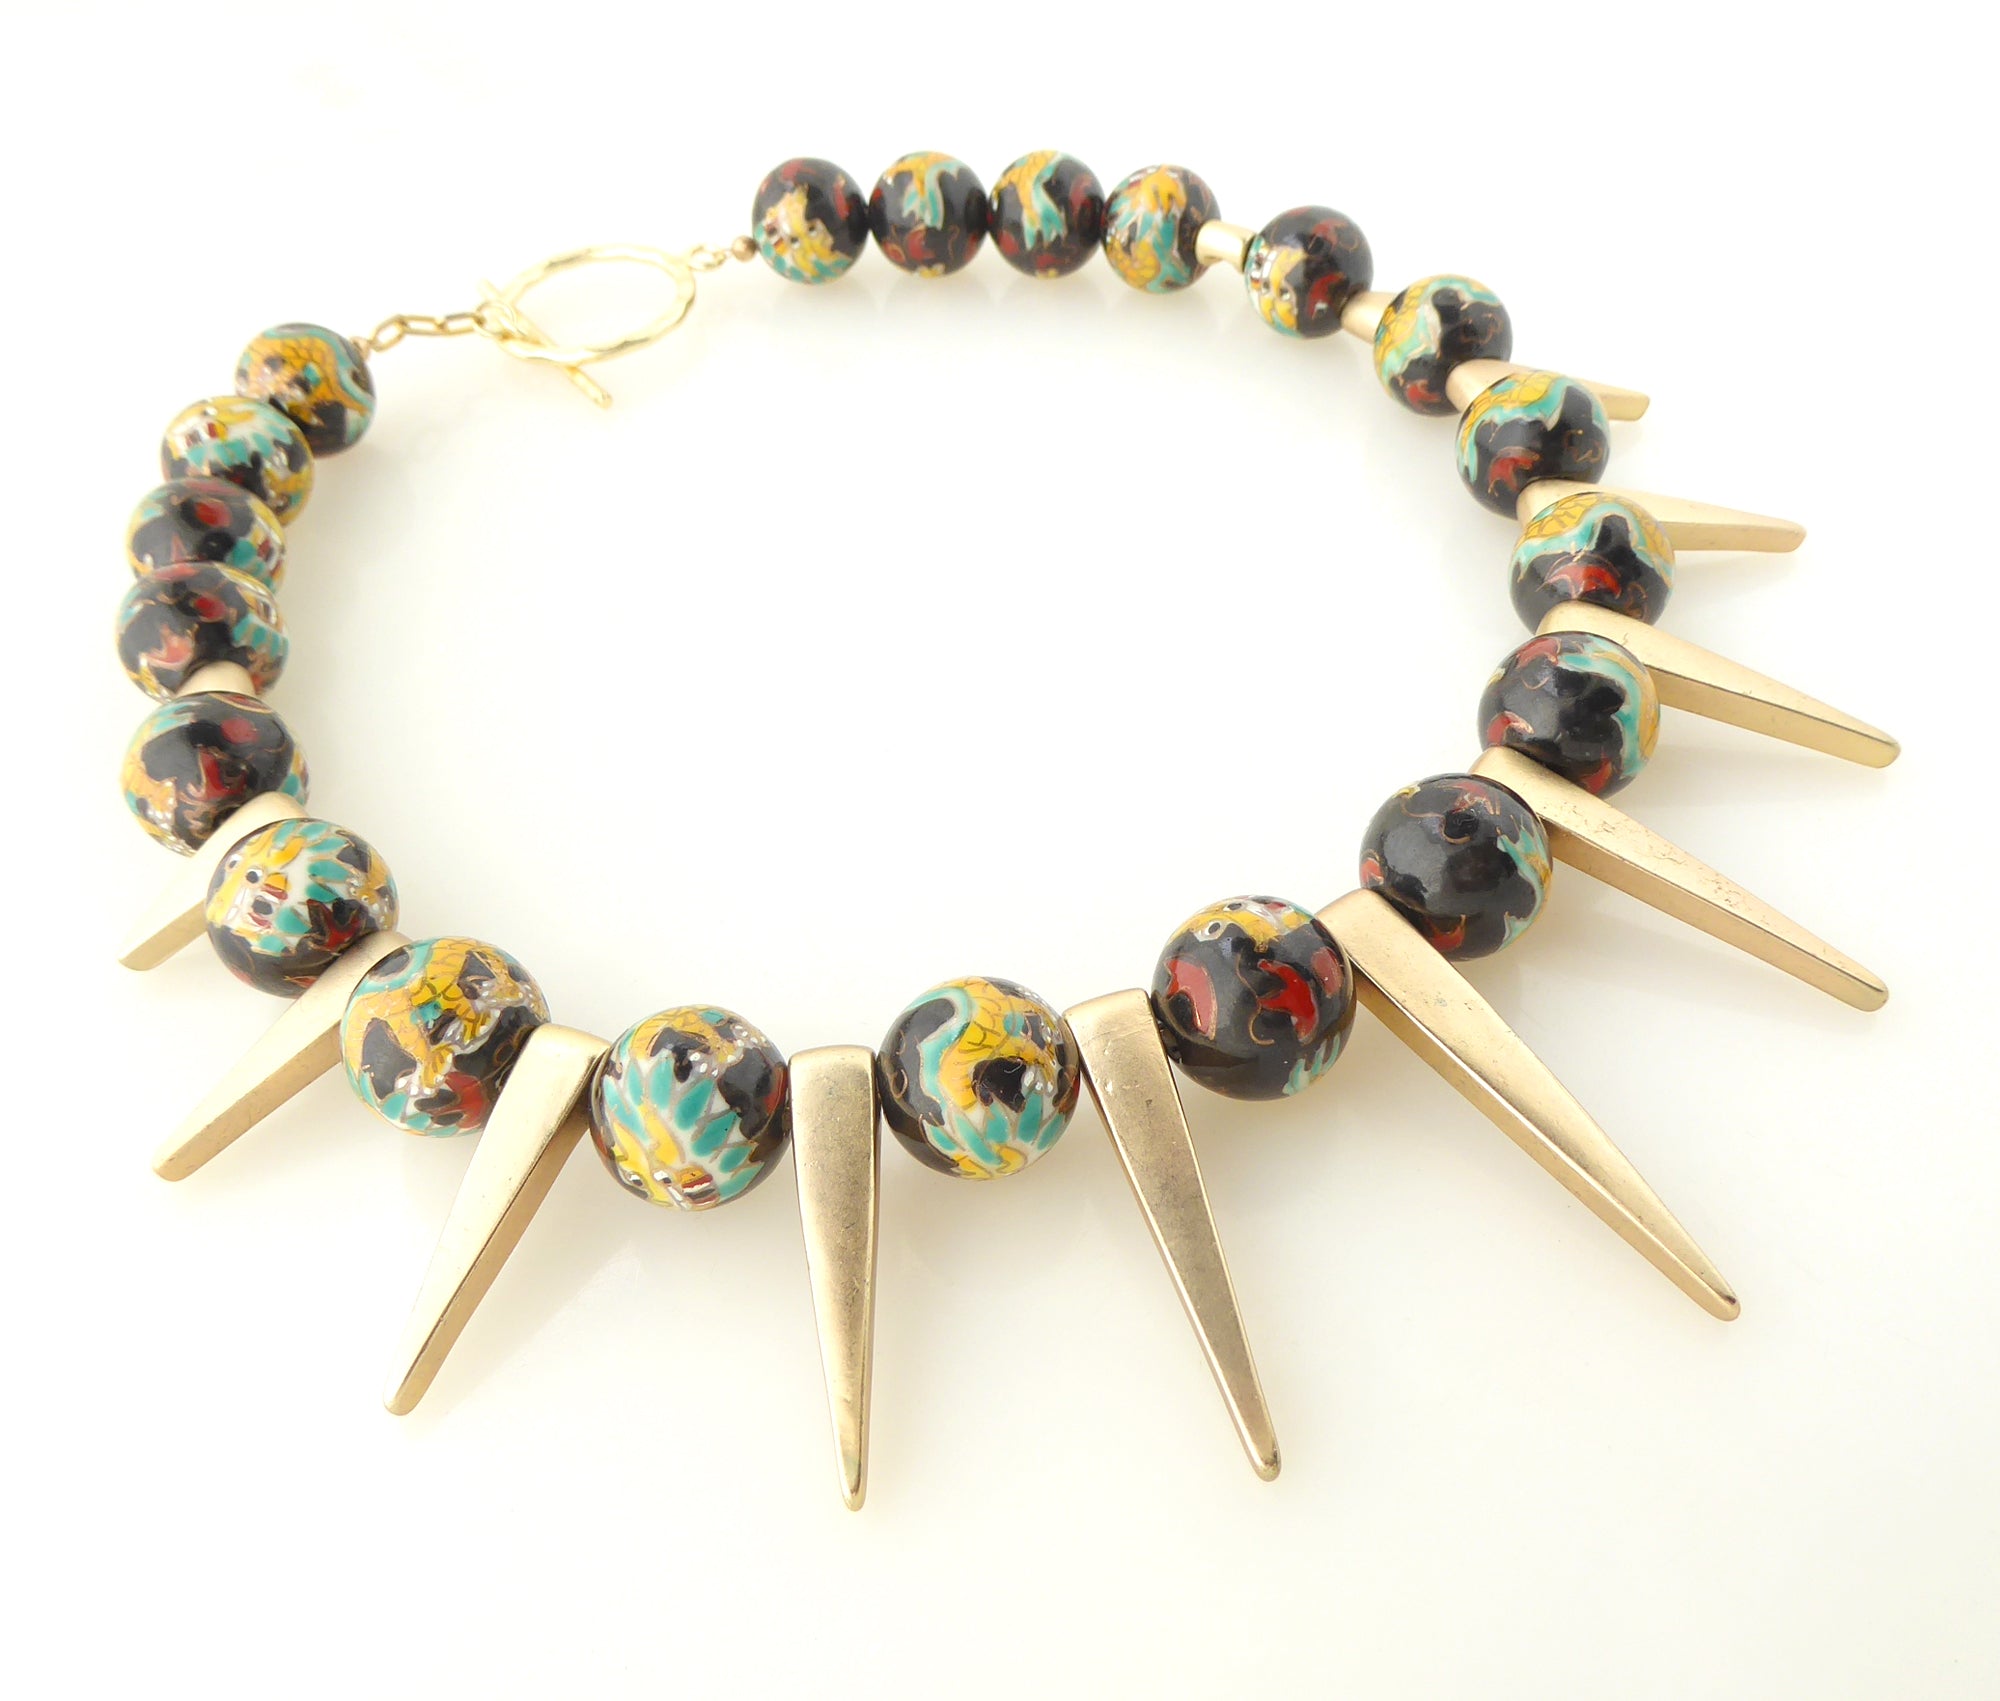 Dragon enamel and gold spike necklace by Jenny Dayco 2